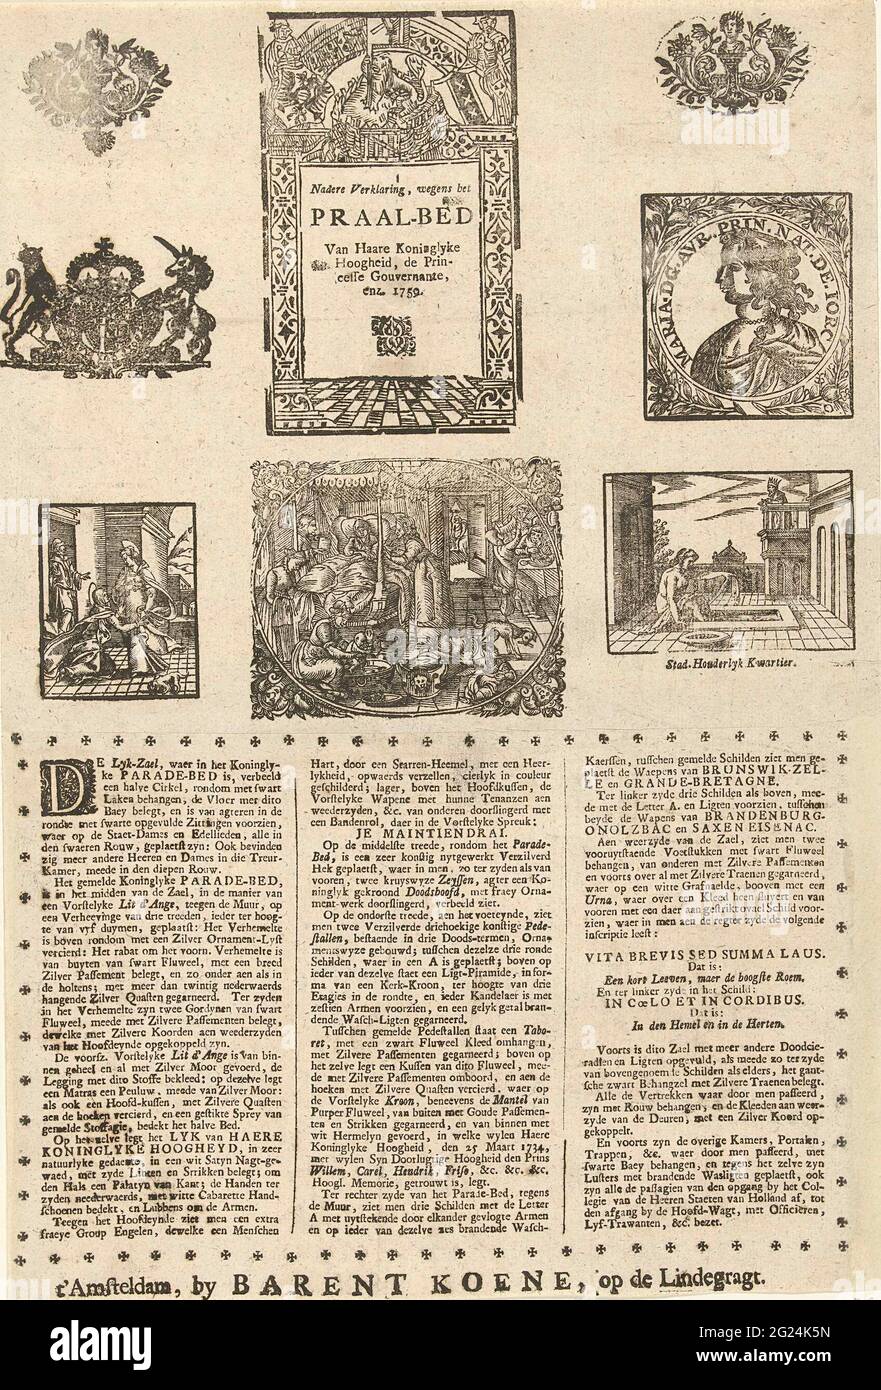 Leaf over the praise bed of princess Anna, 1759; Further statement, due to the praise bed of Haare Koninglyke Highness, the Princesse Governance, etc. 1759. Leaf with a description of the parade hall in three columns and the purge bed on 12 January 1759 Death Anna Anna van Hanover for a few days in February laid out. There are eight old woodcuts on the upper half of the leaf with various topics including a maternity bed and some biblical scenes. Stock Photo